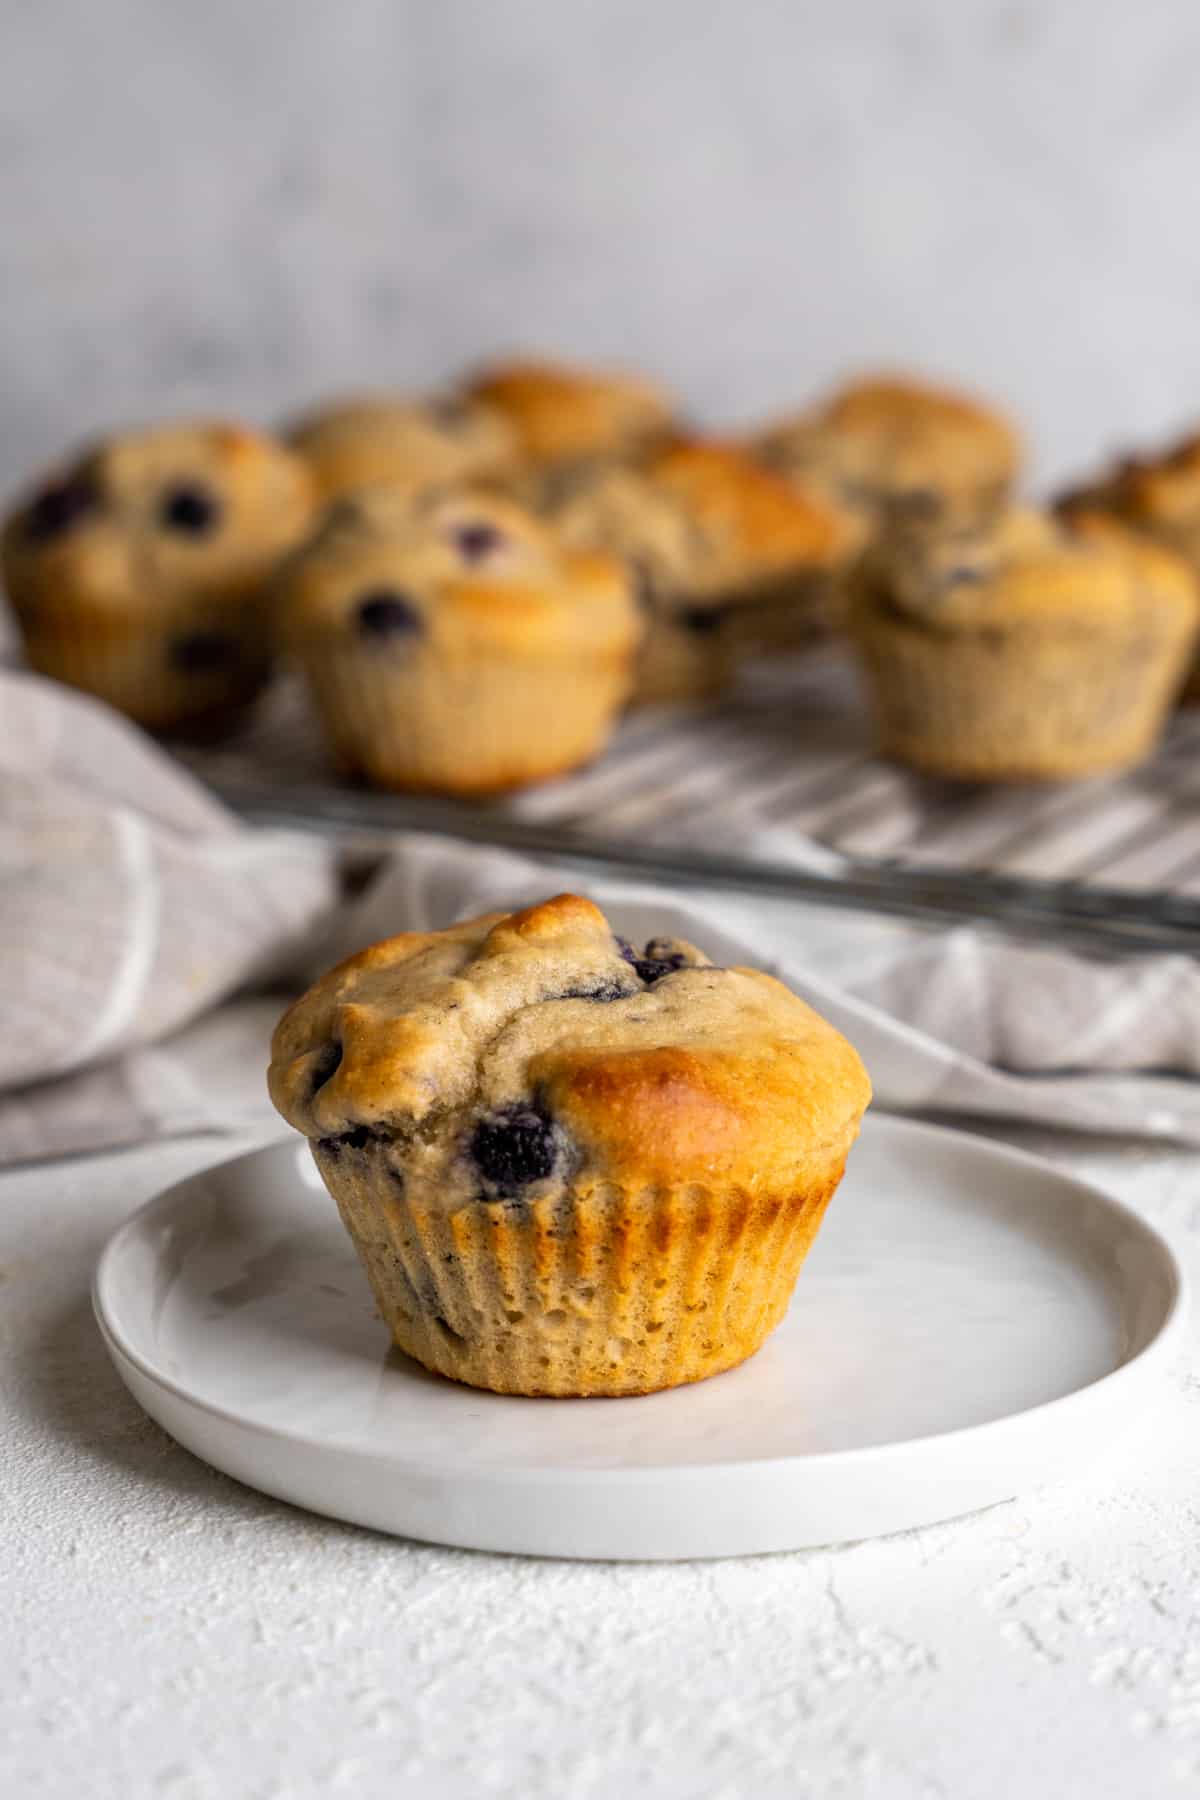 Blueberry protein muffin on a small plate.